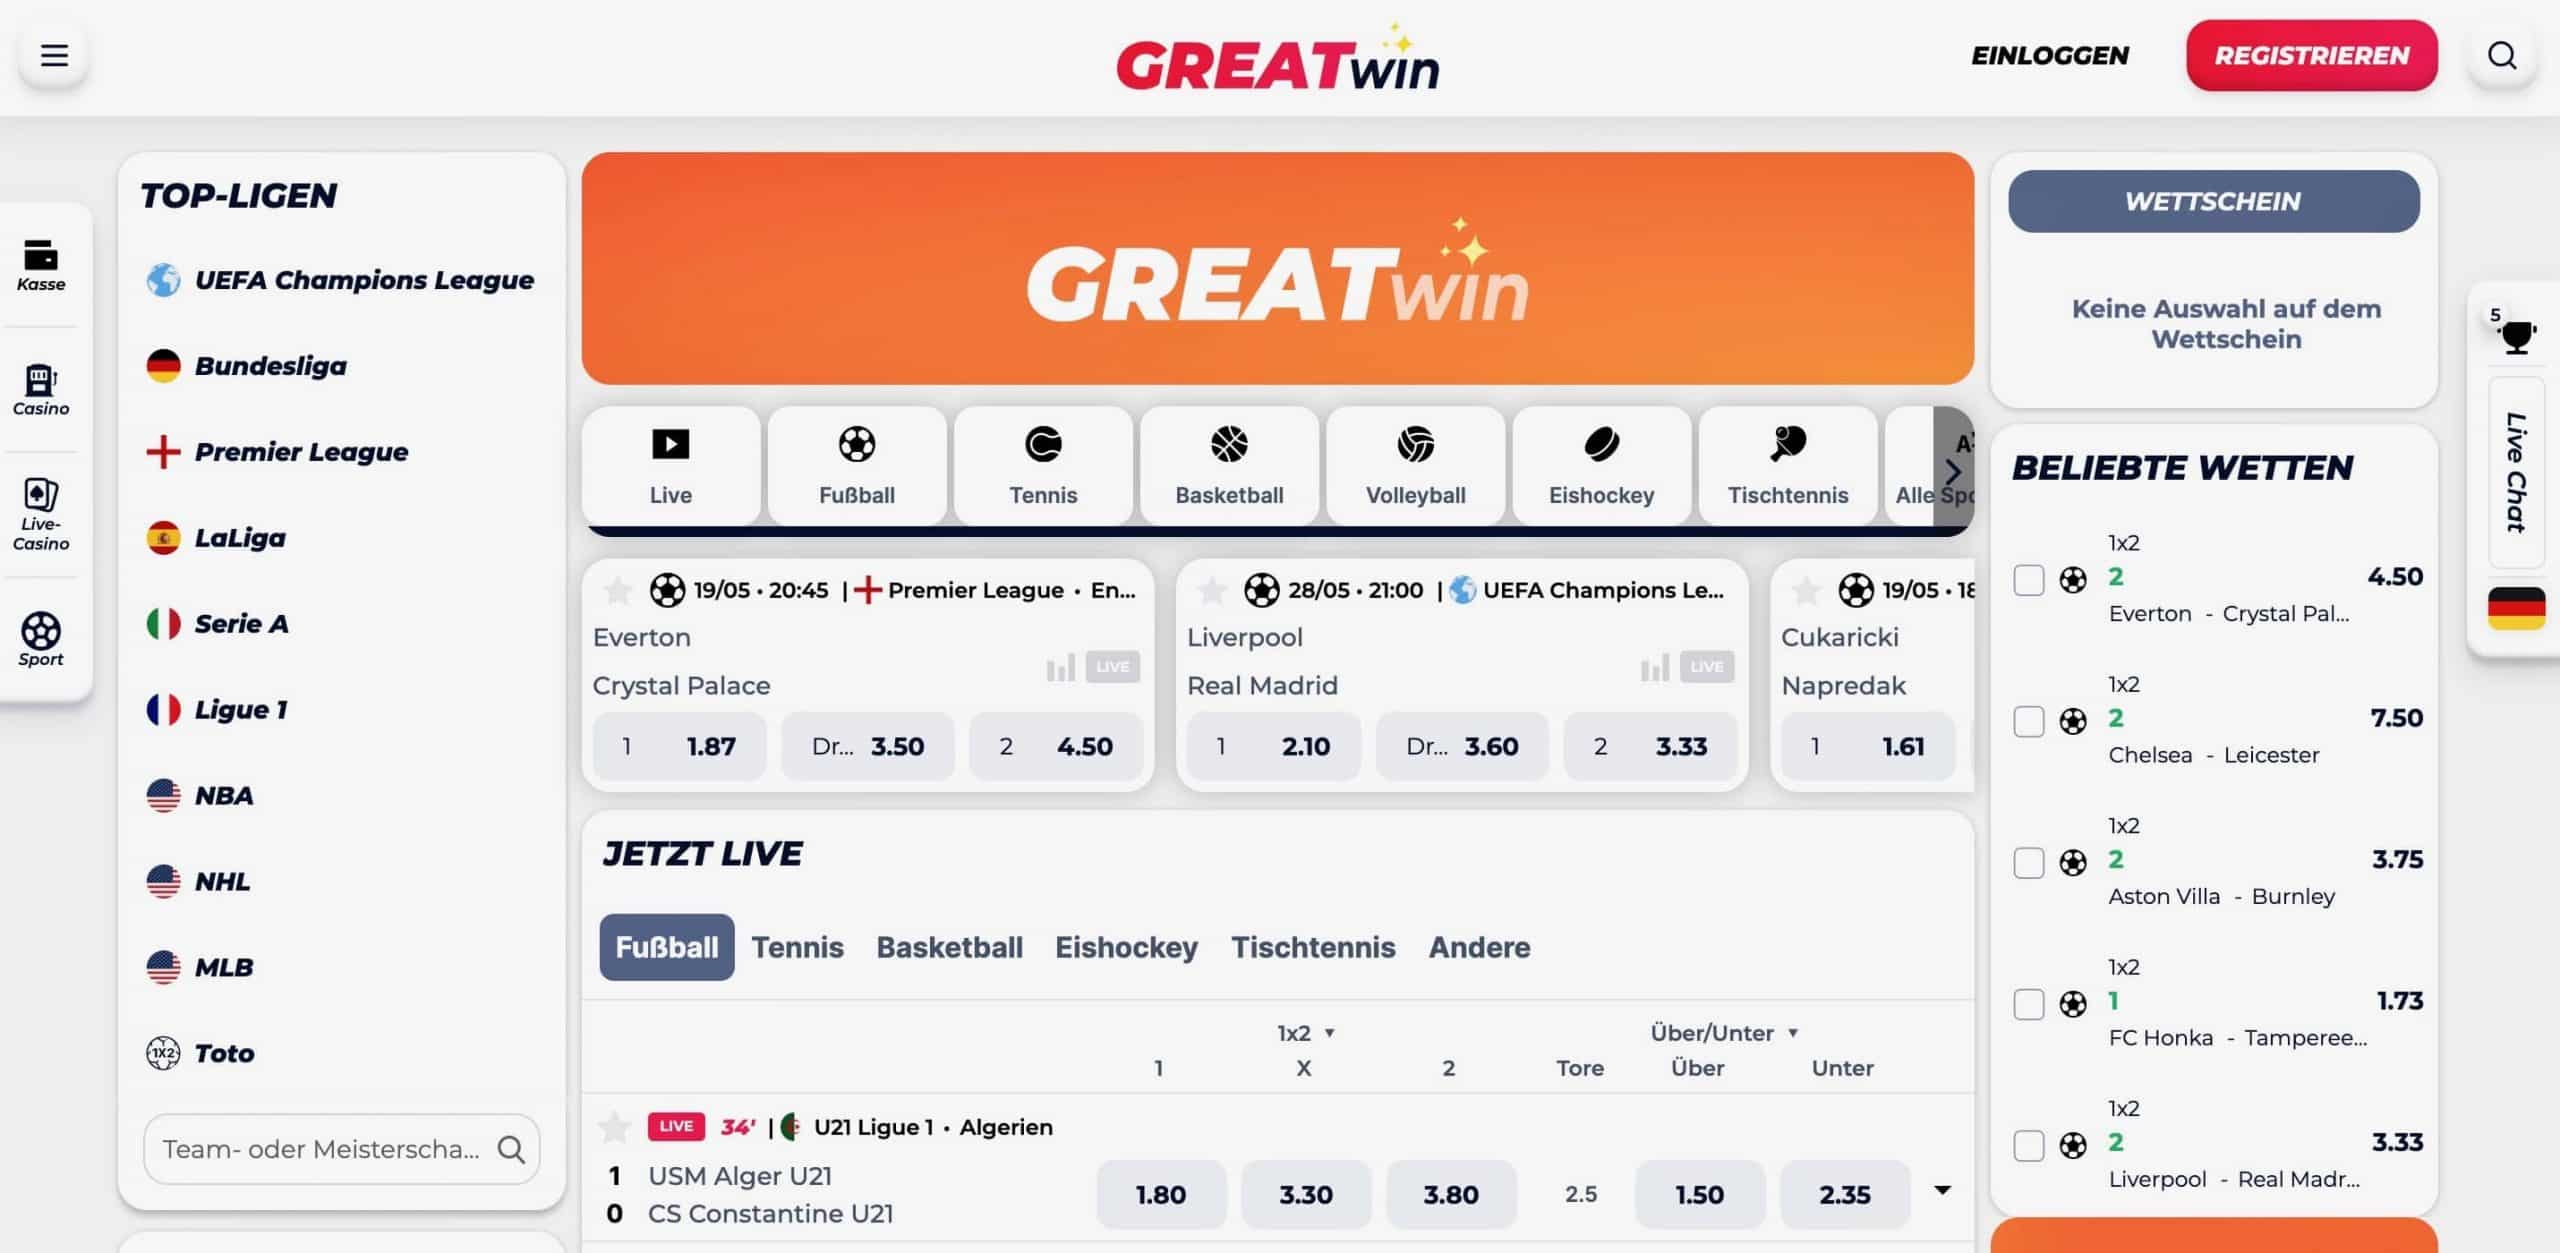 greatwin Test